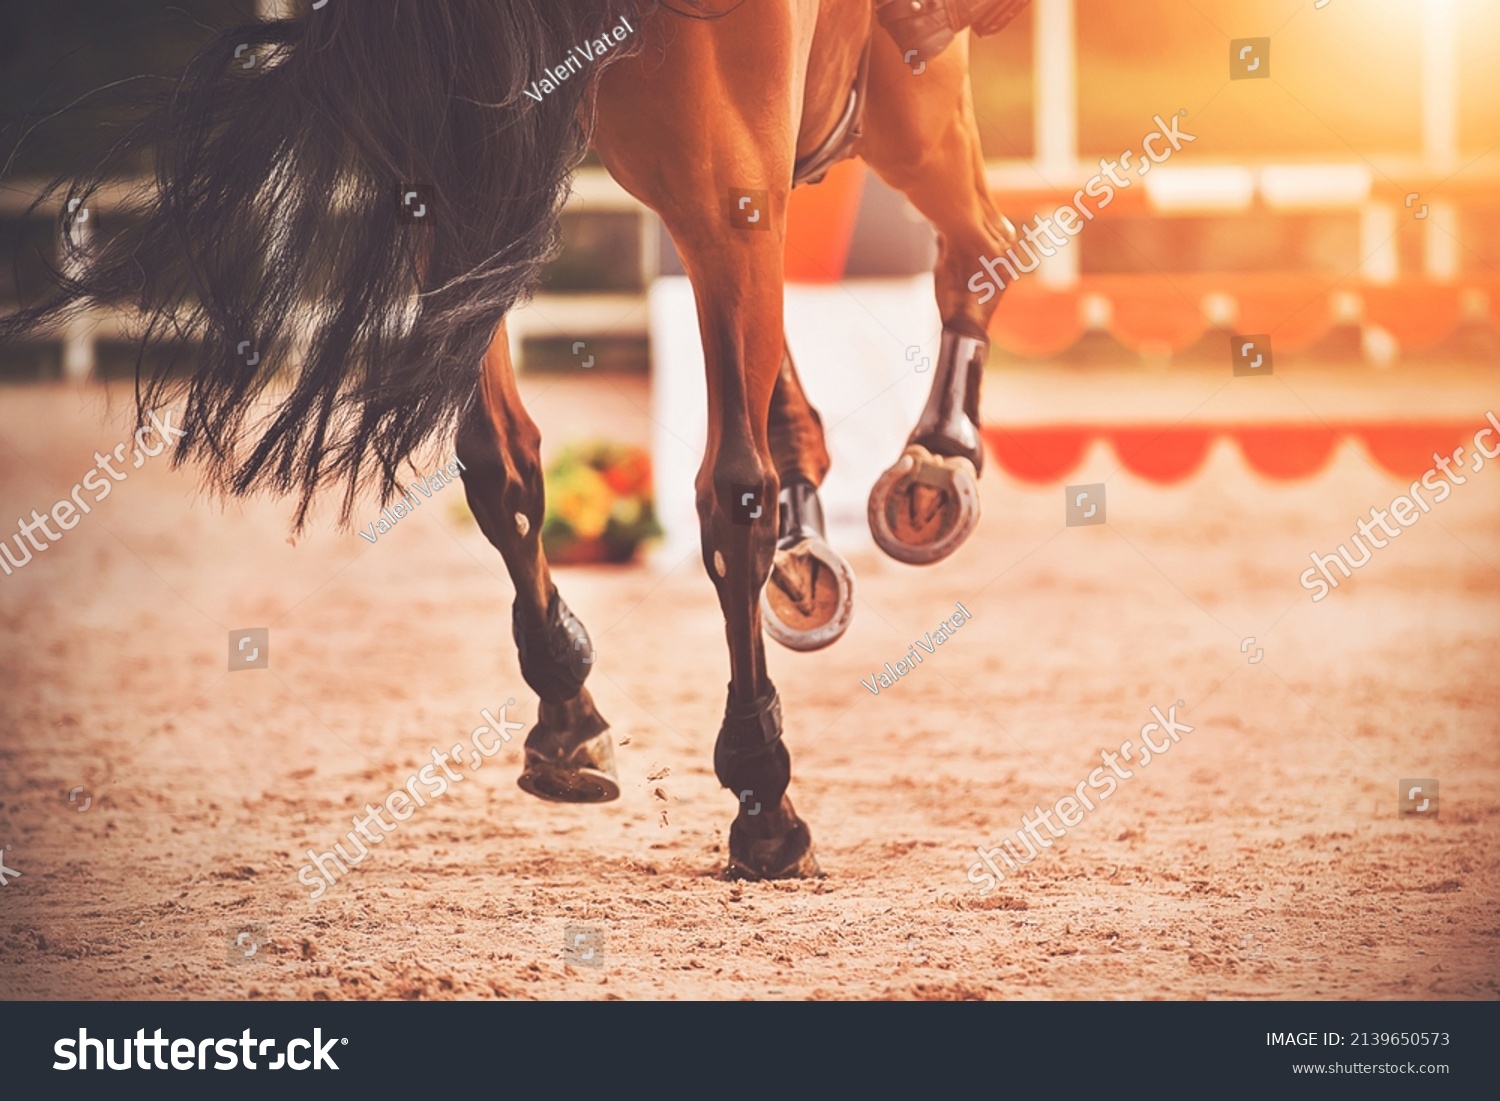 The shod hooves of a galloping bay horse step on the sand of an outdoor arena at equestrian competitions. Horse riding. Equestrian sports. #2139650573